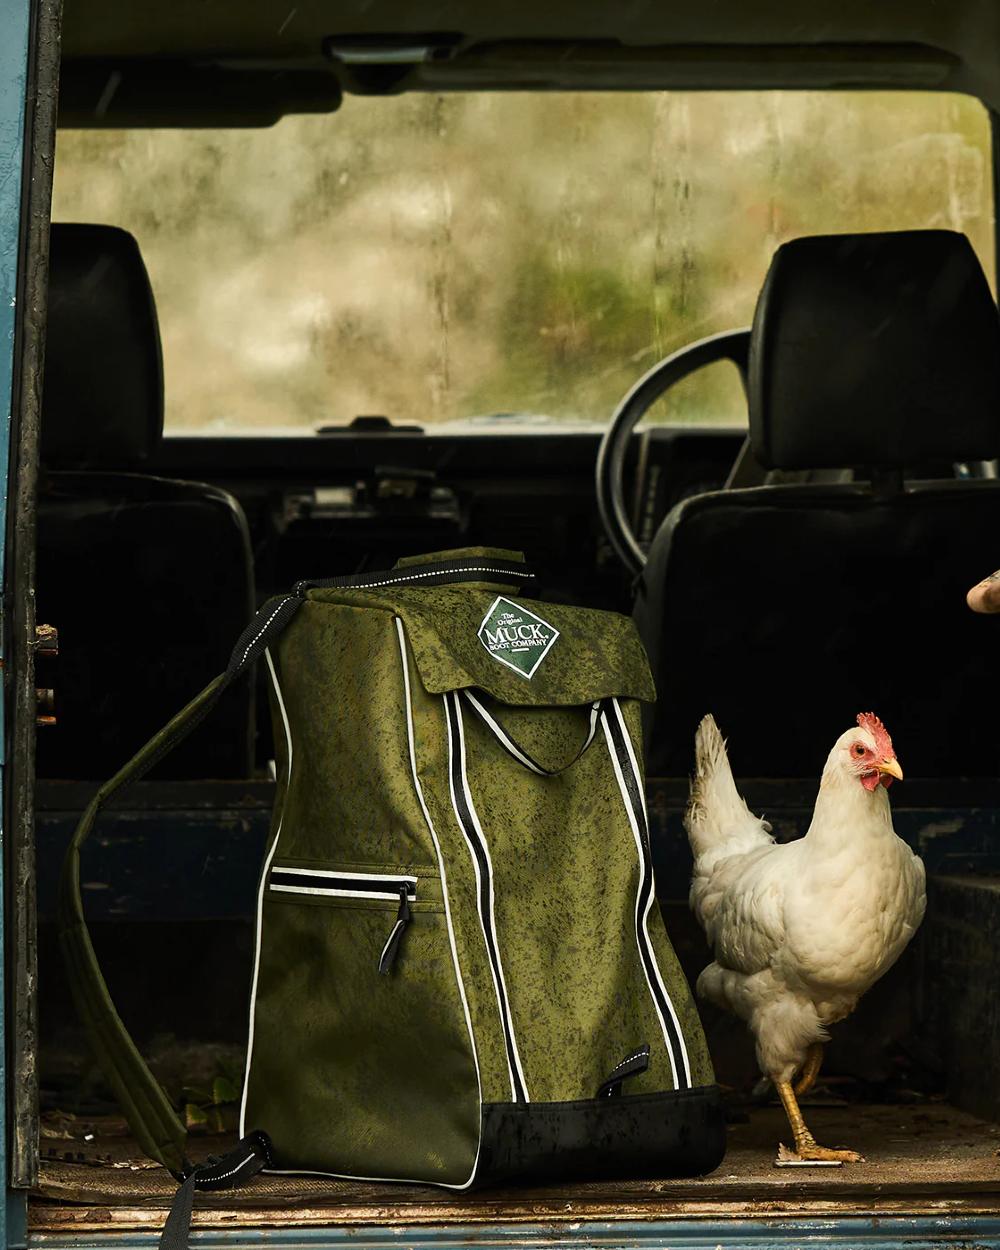 Moss coloured Muck Boot Wellington Boot Bag in boot of a farmers car